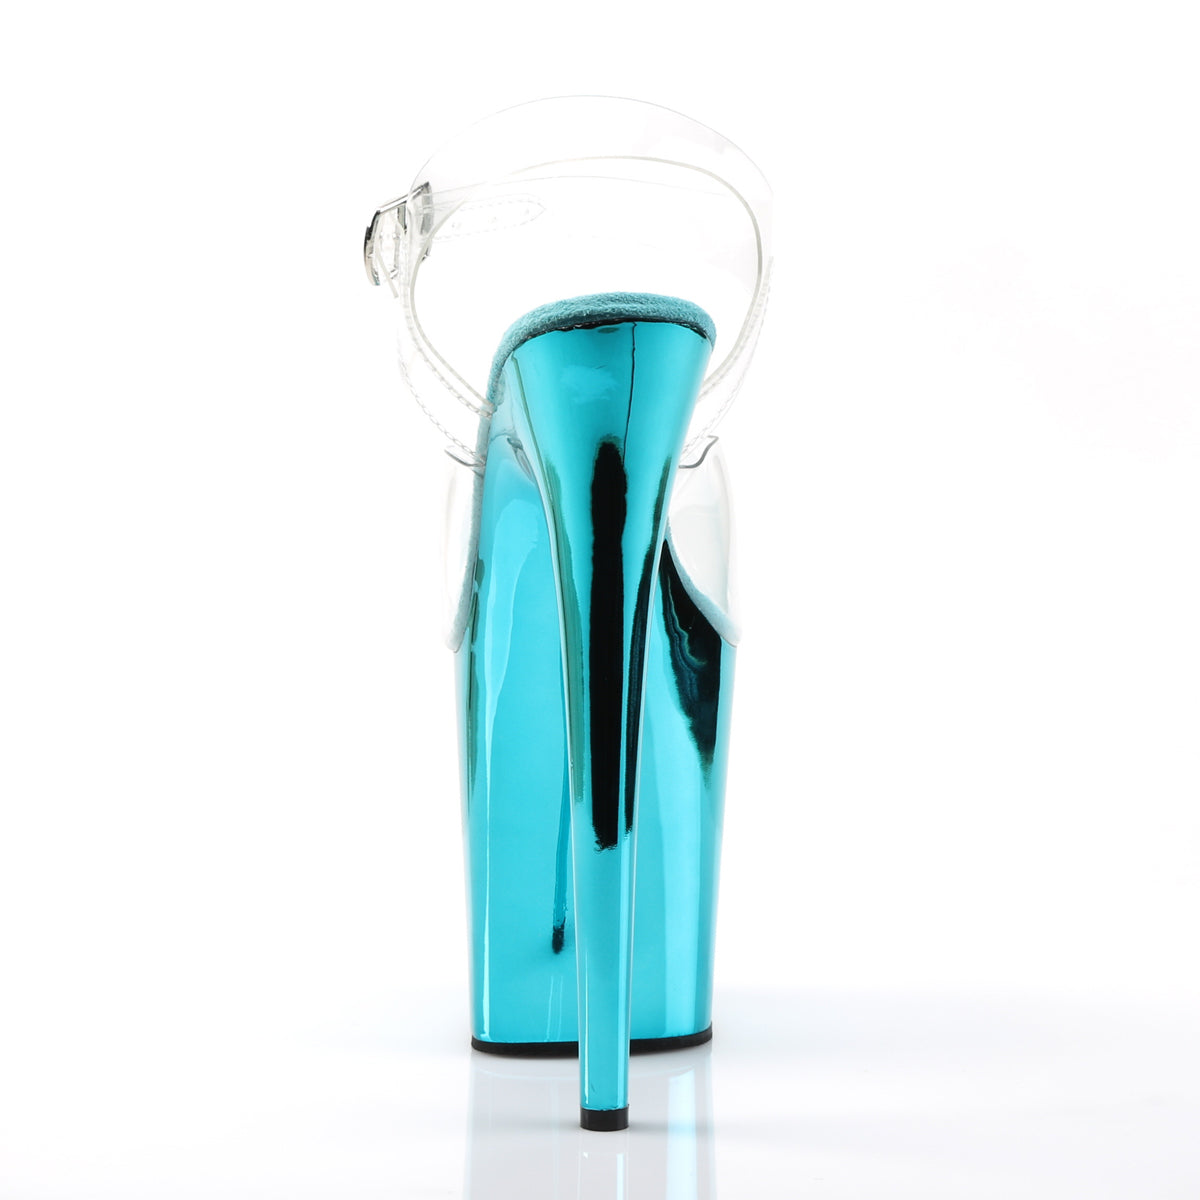 FLAMINGO-808 Pleaser 8" Heel Clear Turquoise Strippers Shoes-Pleaser- Sexy Shoes Fetish Footwear